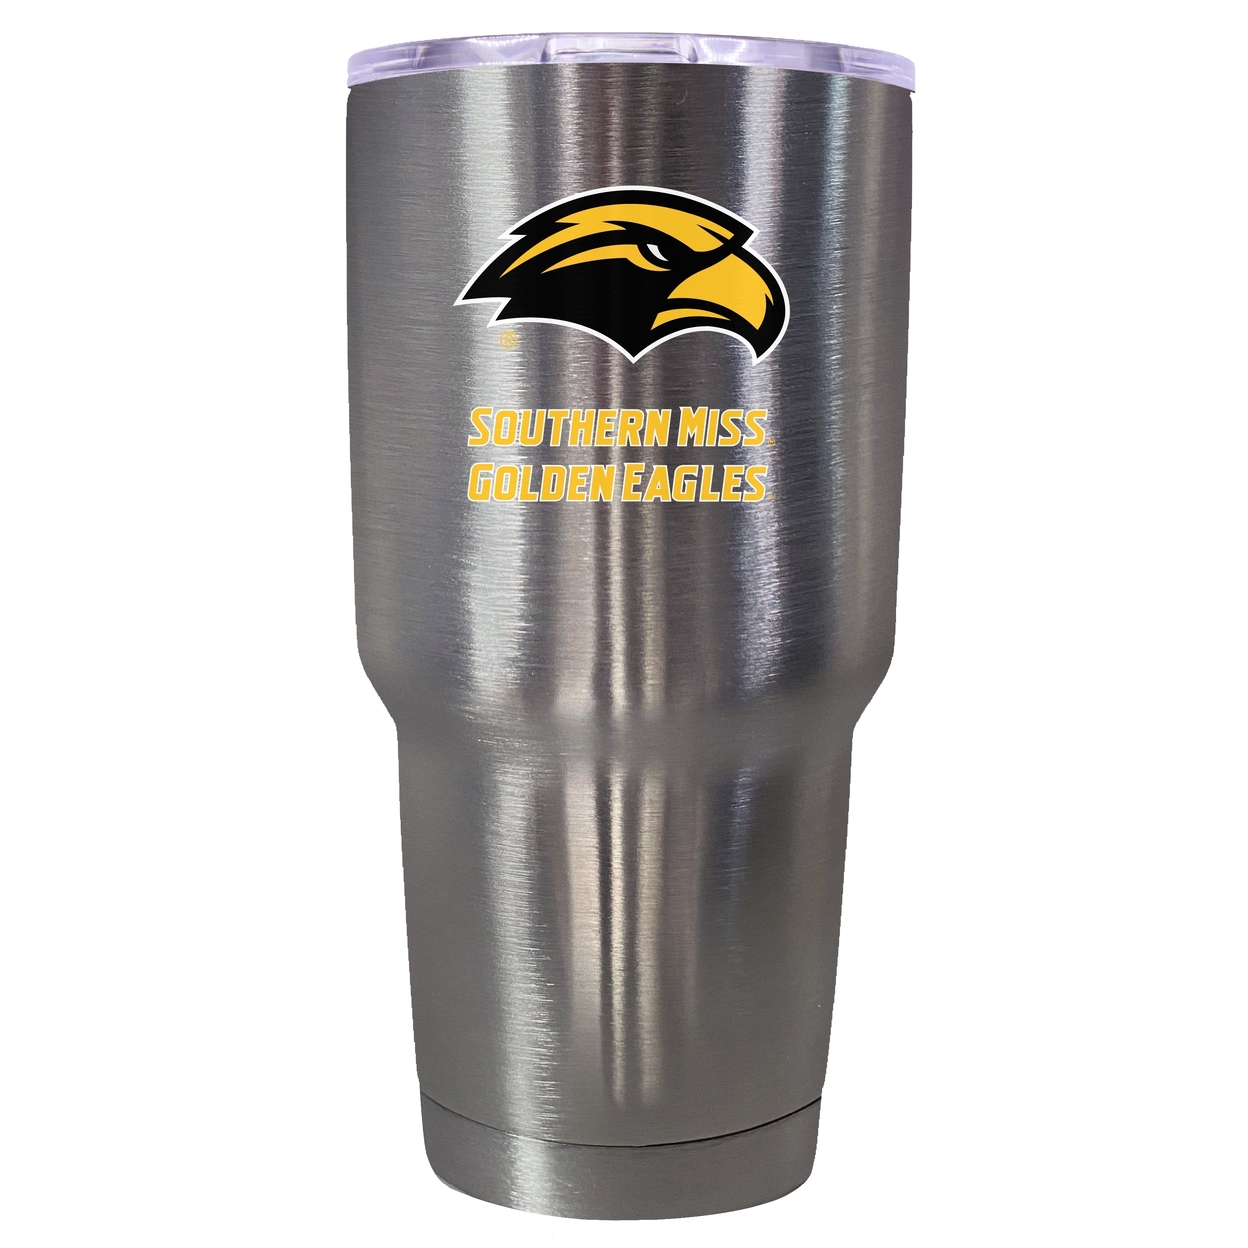 Southern Mississippi Golden Eagles 24 Oz Insulated Stainless Steel Tumbler